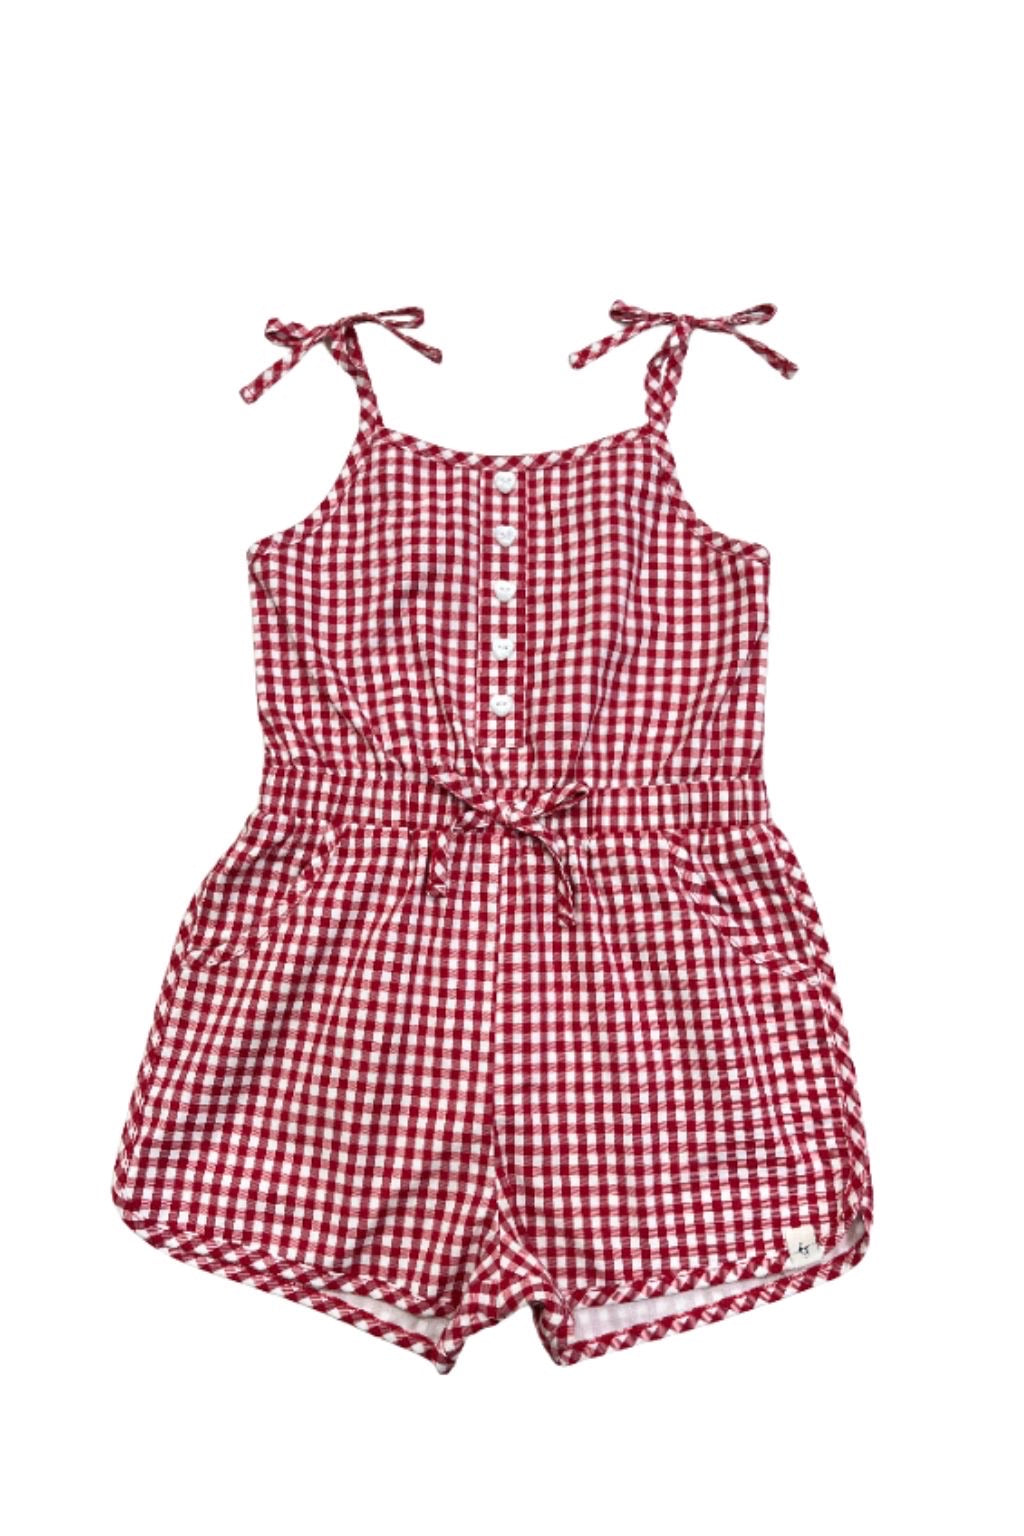 *PREORDER* Red Gingham Short Style Romper